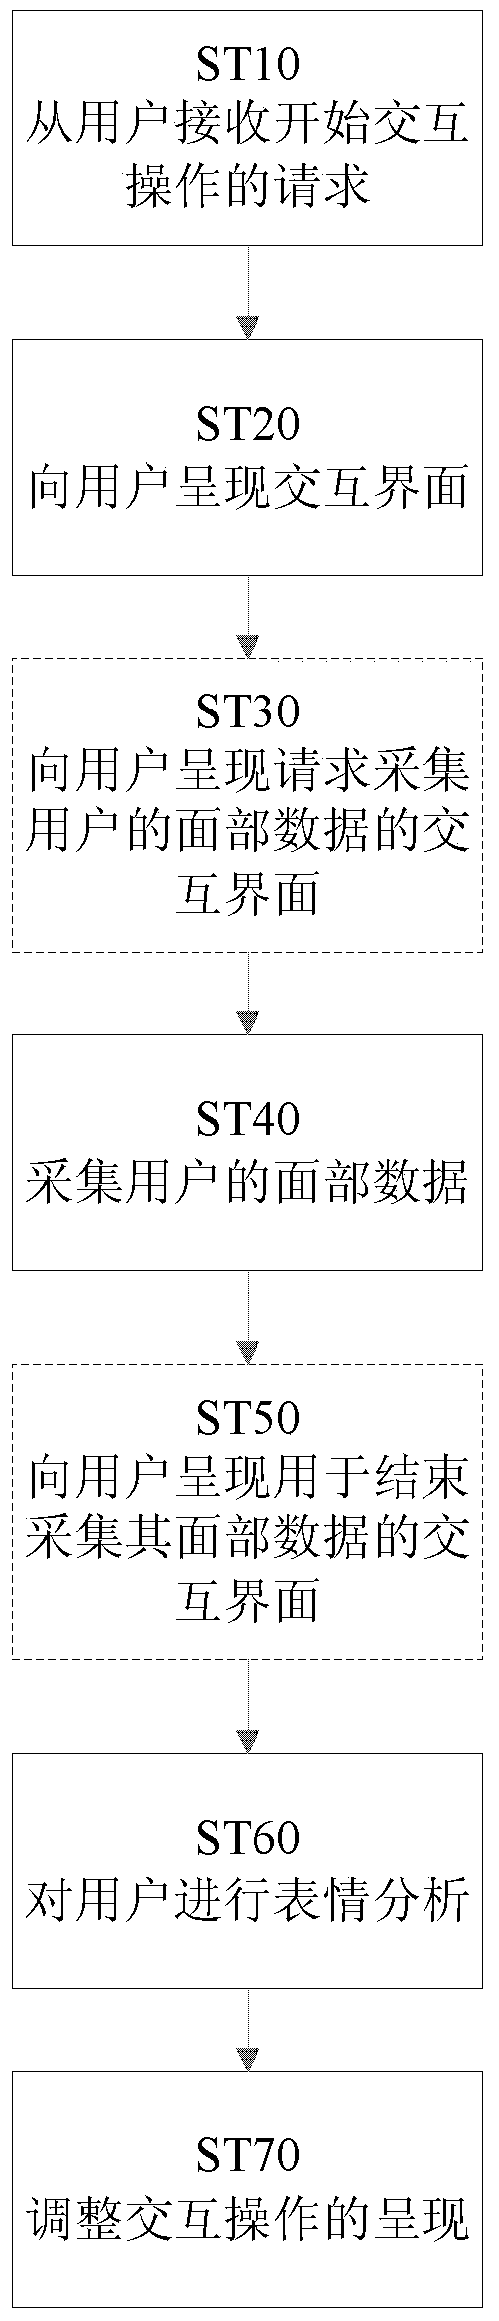 Expression recognition-based interaction method and device for executing the method